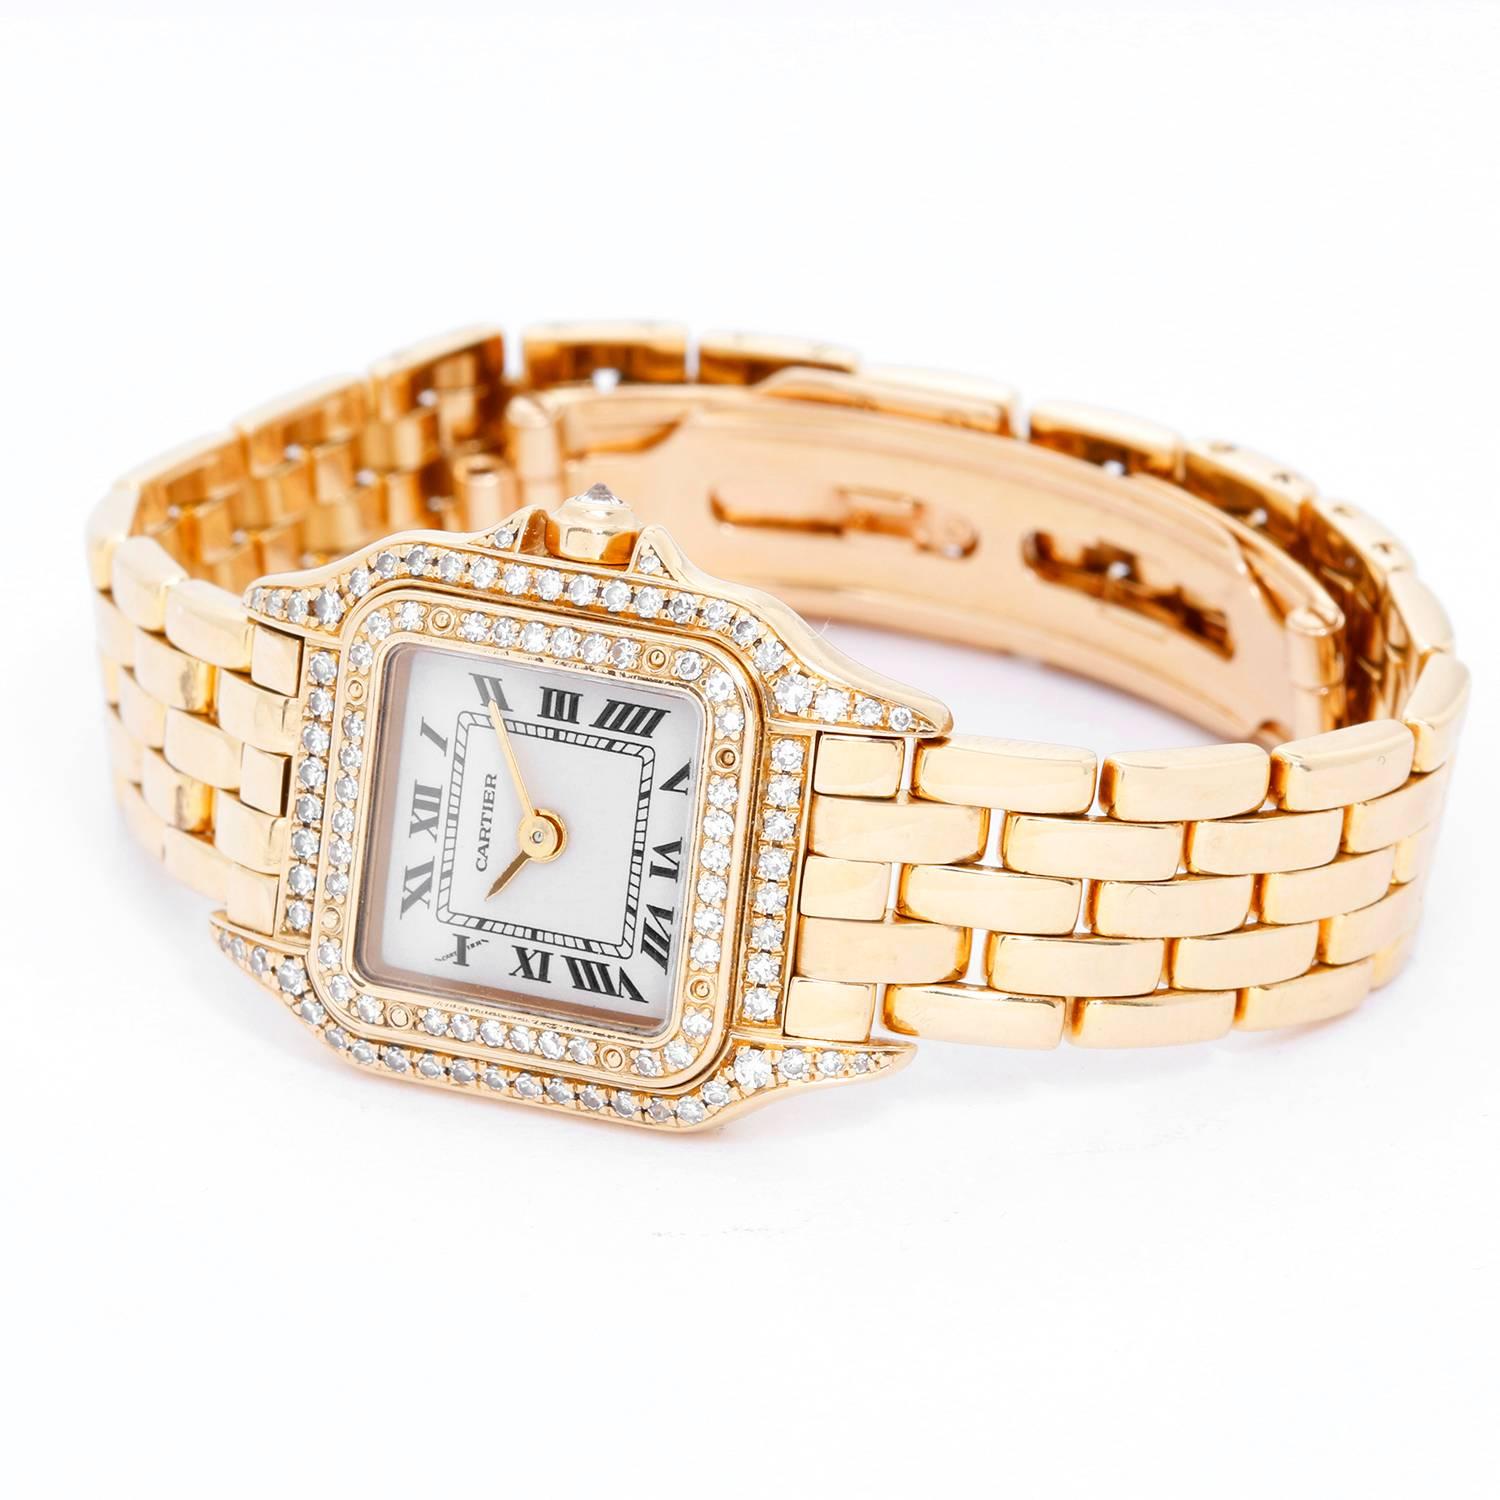 Cartier Small 18K Yellow Gold Panther  Ladies Watch -  Quartz. 18K Yellow Gold  (30 x 22 mm); Diamond bezel. White dial   with Roman Numerals. 18K Yellow Gold Panther bracelet with deployant buckle. Pre-owned with box.